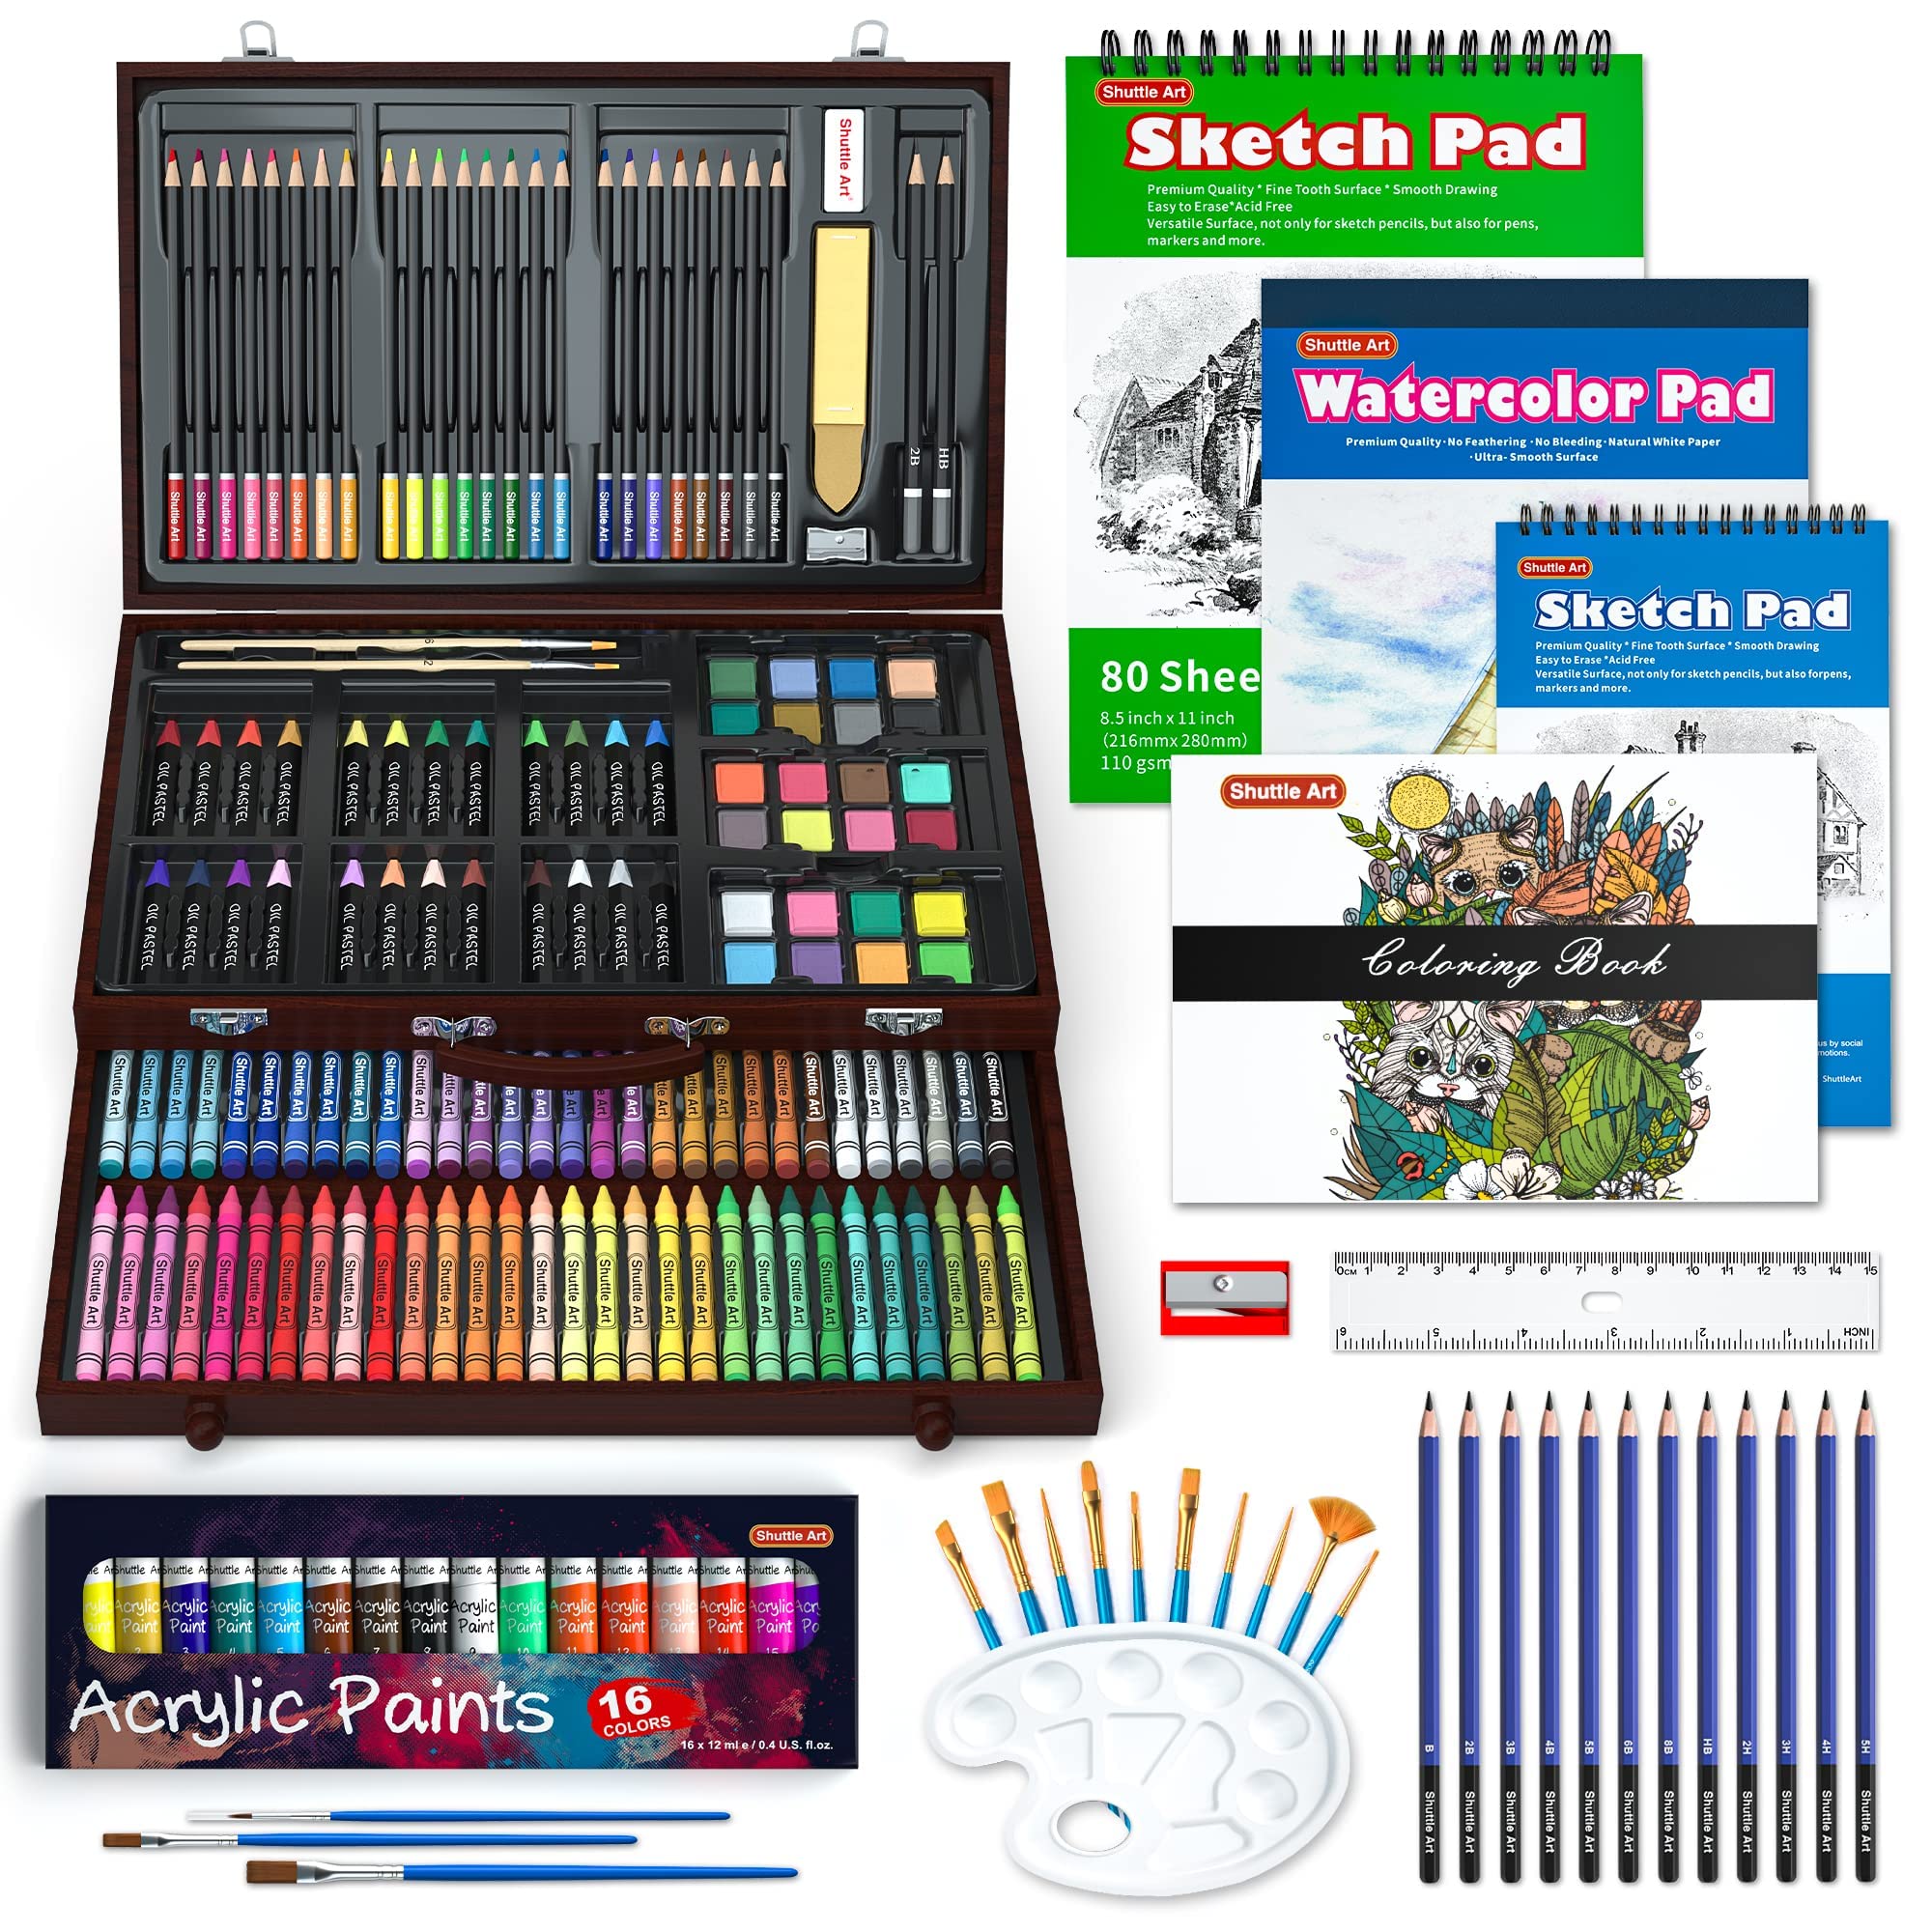 Shuttle Art 186 Piece Deluxe Art Set, Art Supplies in Wooden Case, Painting Drawing Art Kit with Acrylic Paint Pencils Oil Pastels Watercolor Cakes Coloring Book Watercolor Sketch Pad for Kids Adults